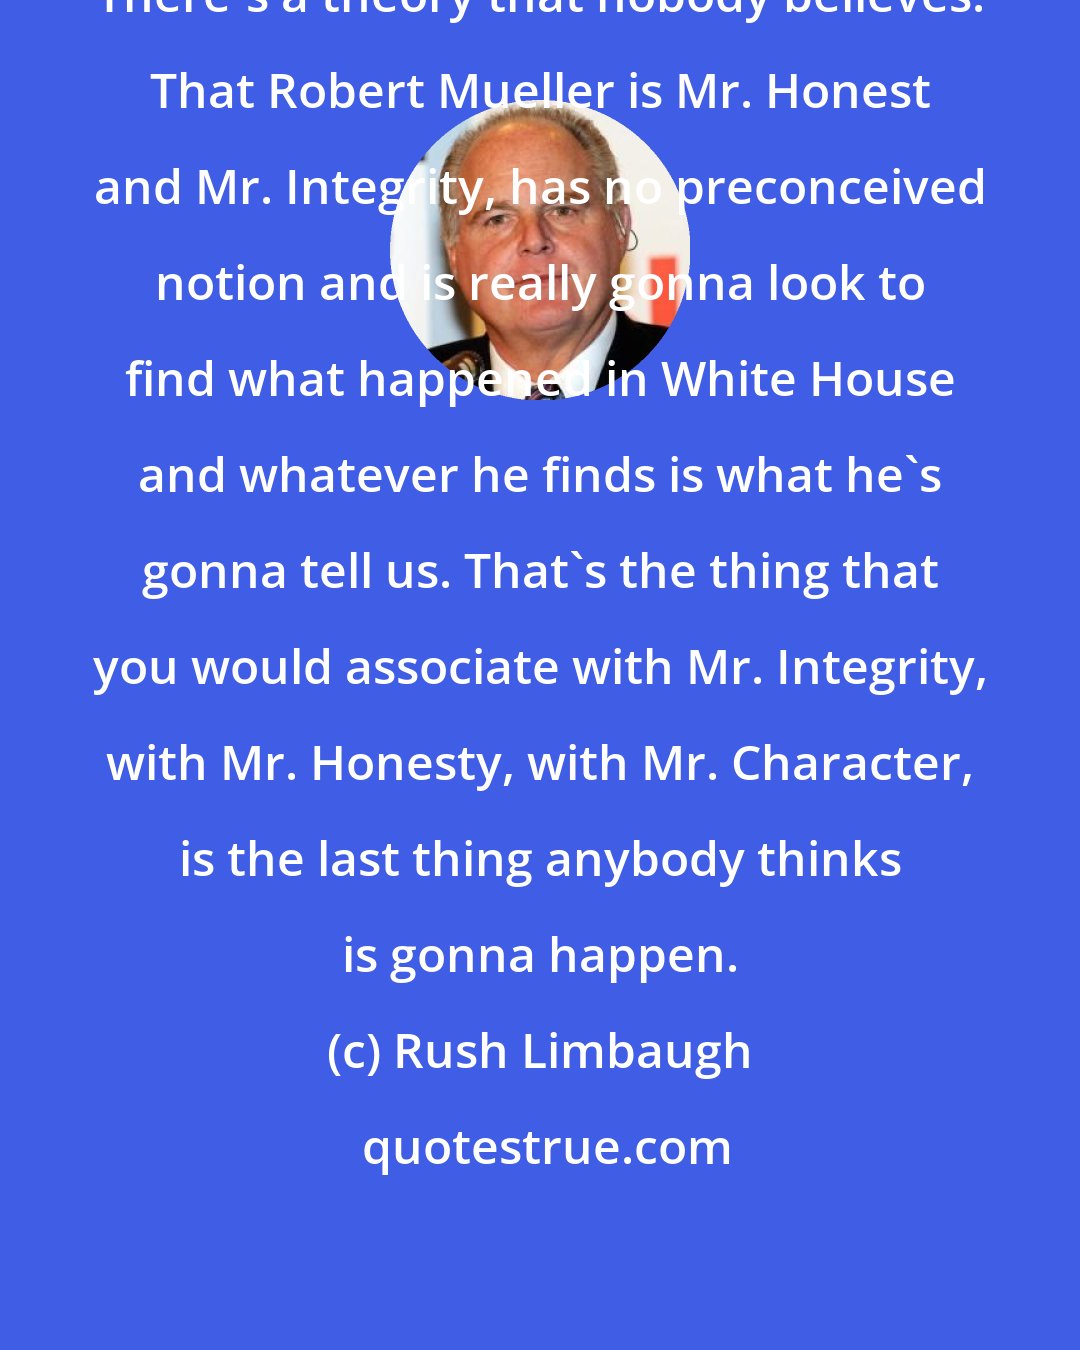 Rush Limbaugh: There's a theory that nobody believes. That Robert Mueller is Mr. Honest and Mr. Integrity, has no preconceived notion and is really gonna look to find what happened in White House and whatever he finds is what he's gonna tell us. That's the thing that you would associate with Mr. Integrity, with Mr. Honesty, with Mr. Character, is the last thing anybody thinks is gonna happen.